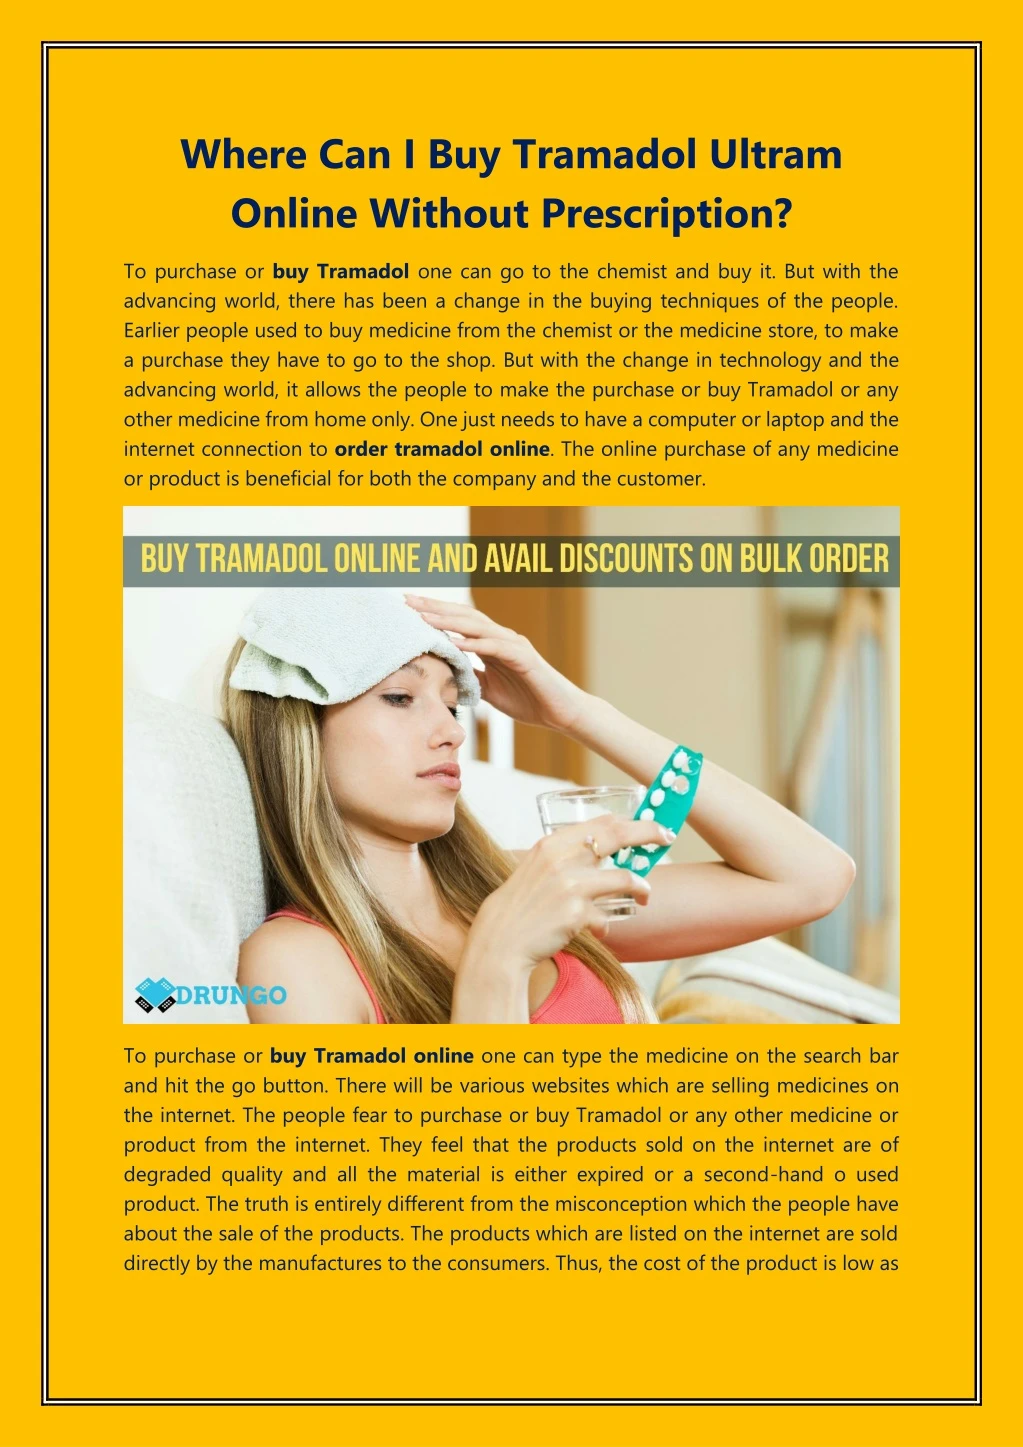 where can i buy tramadol ultram online without